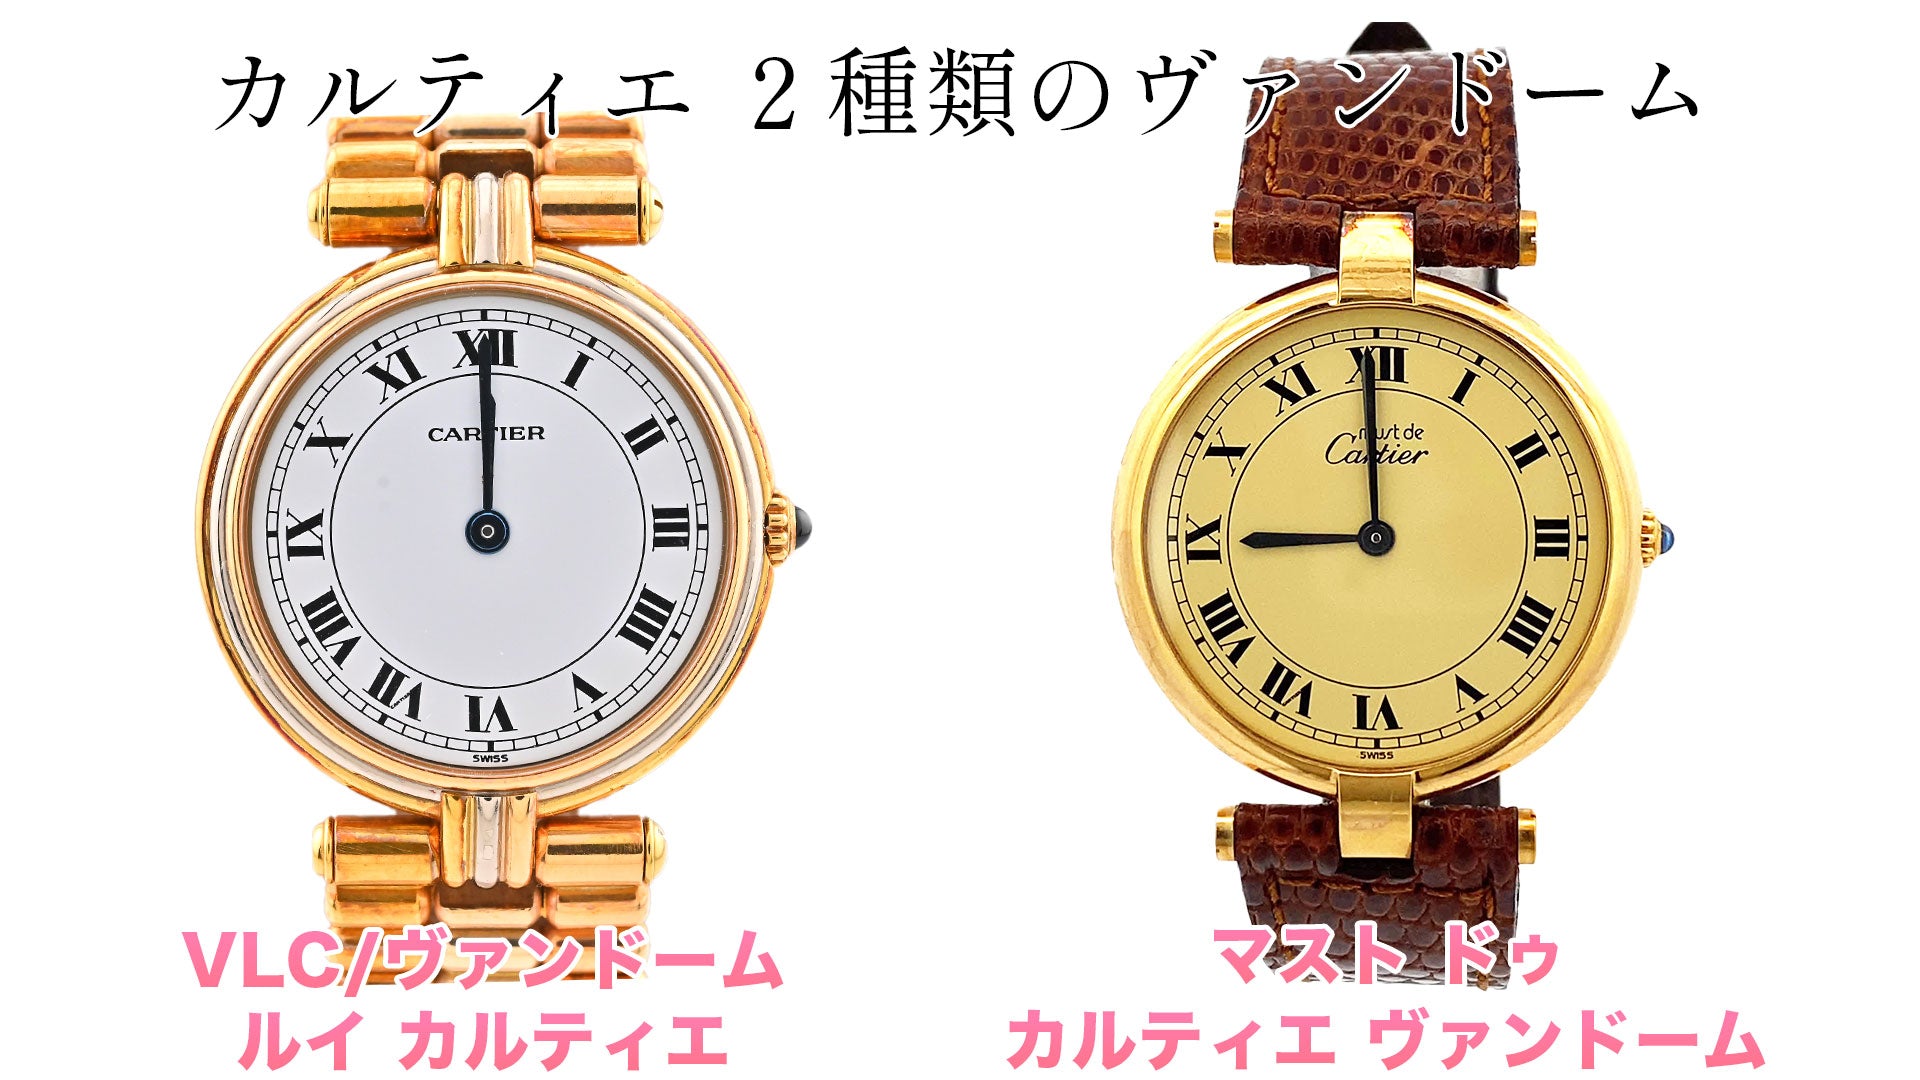 The difference between the two types of Cartier women's watches, the Vendome